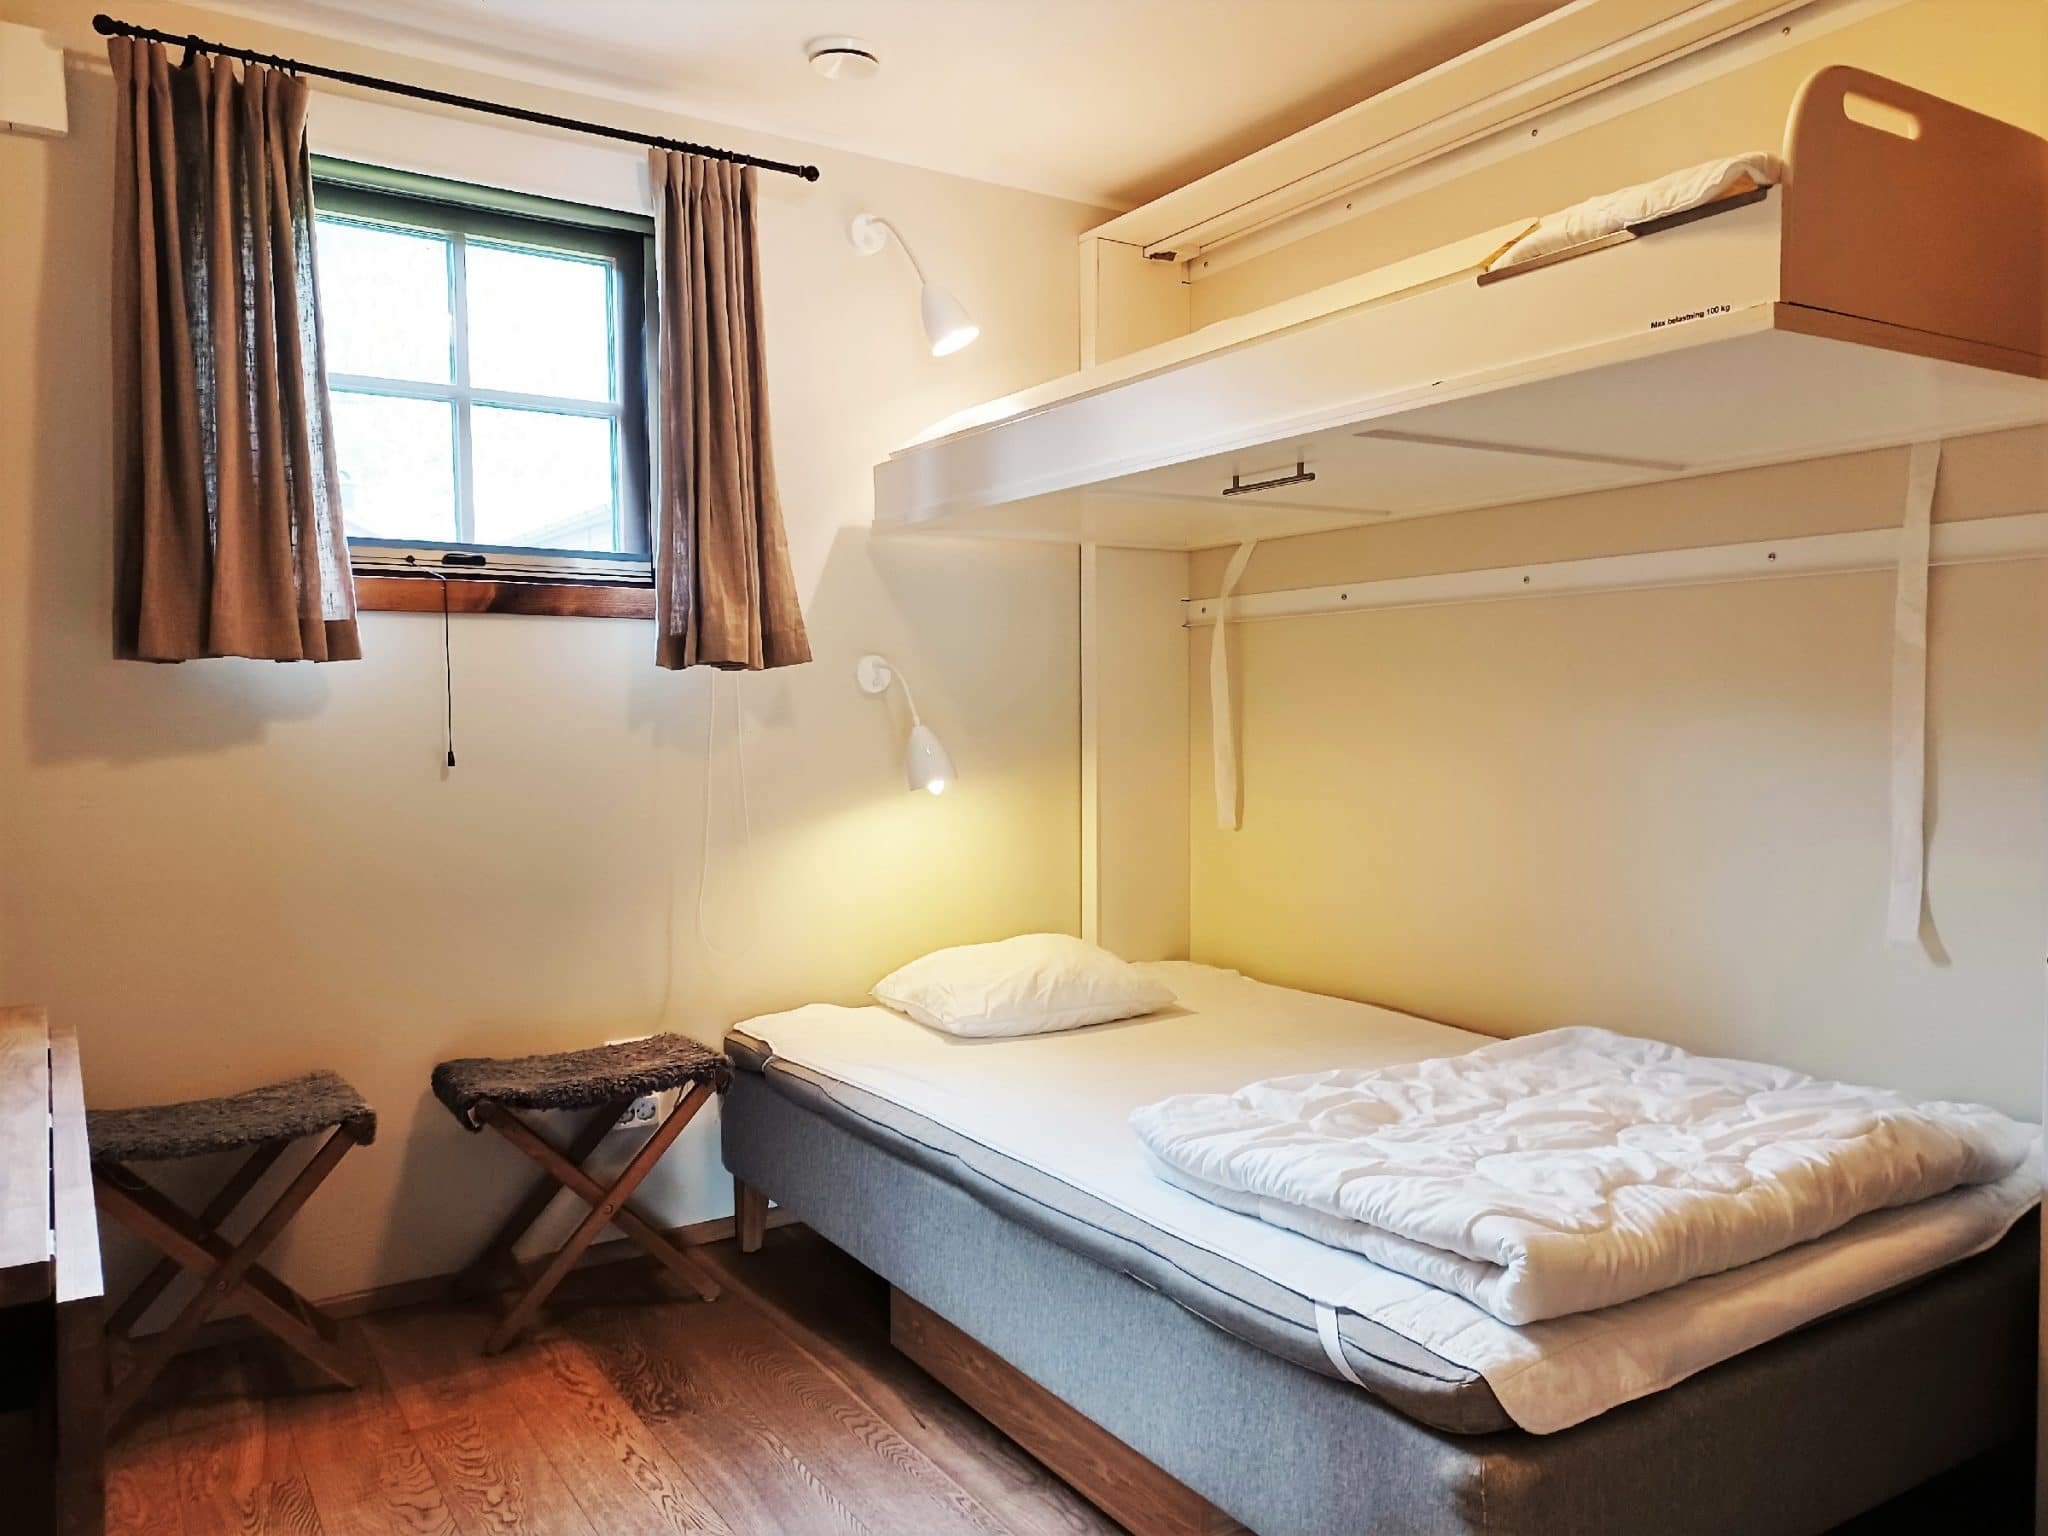 View of bedroom with bunk bed.